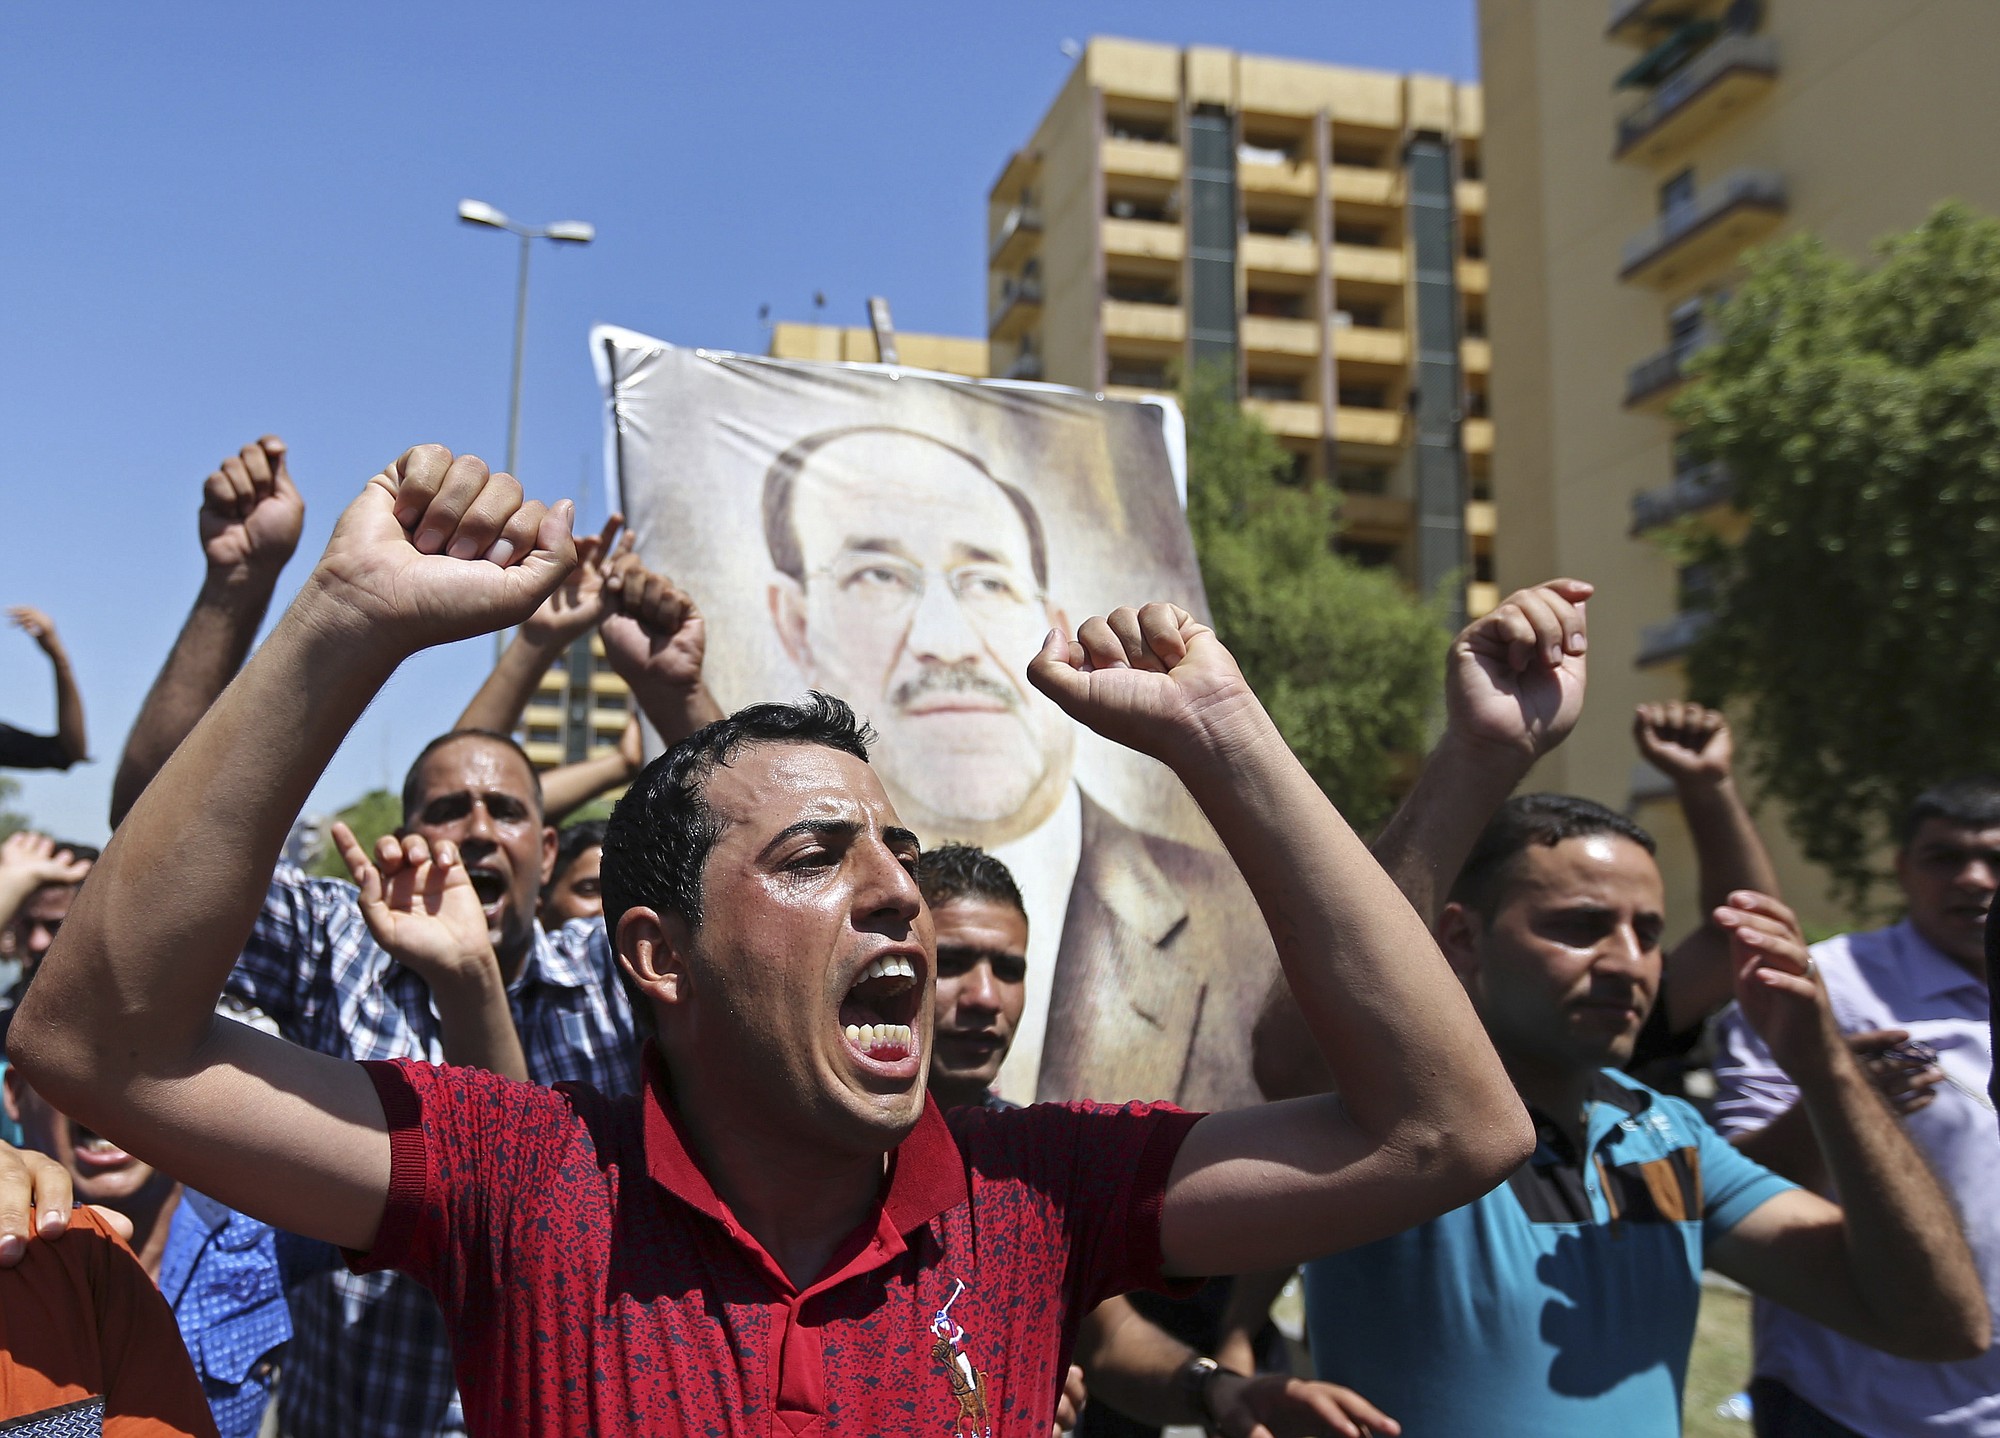 Iraqis chant pro-government slogans and display placards bearing a picture of embattled Prime Minister Nouri al-Maliki during a demonstration in Baghdad, Iraq, on Monday.